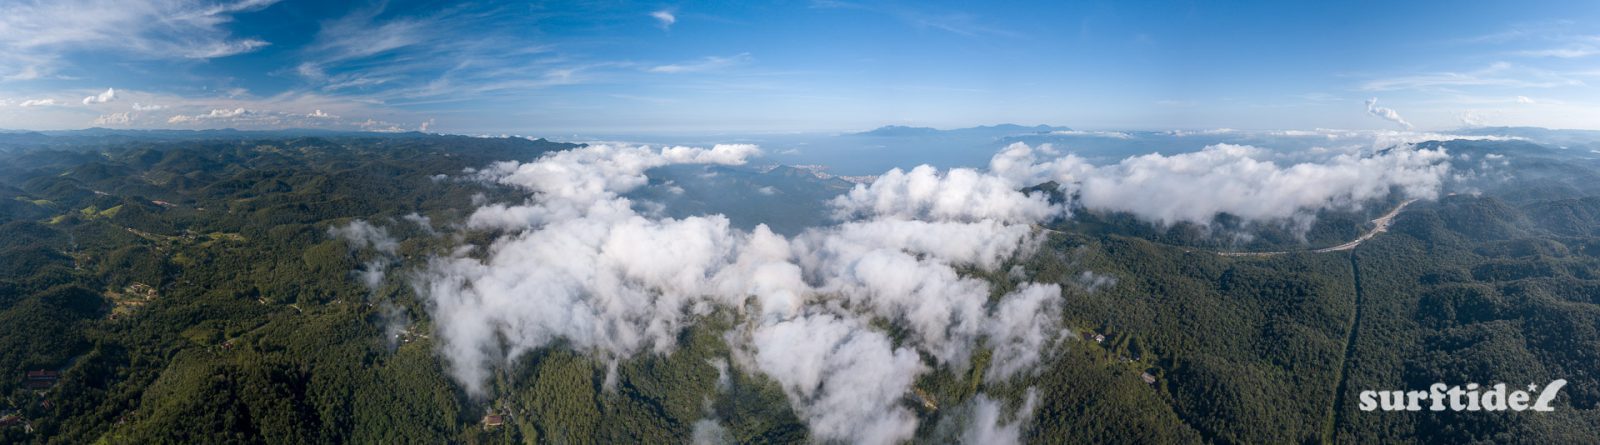 Panoramic Aerial Photo Of Litoral Norte and the Serra Do Mar, Brazil